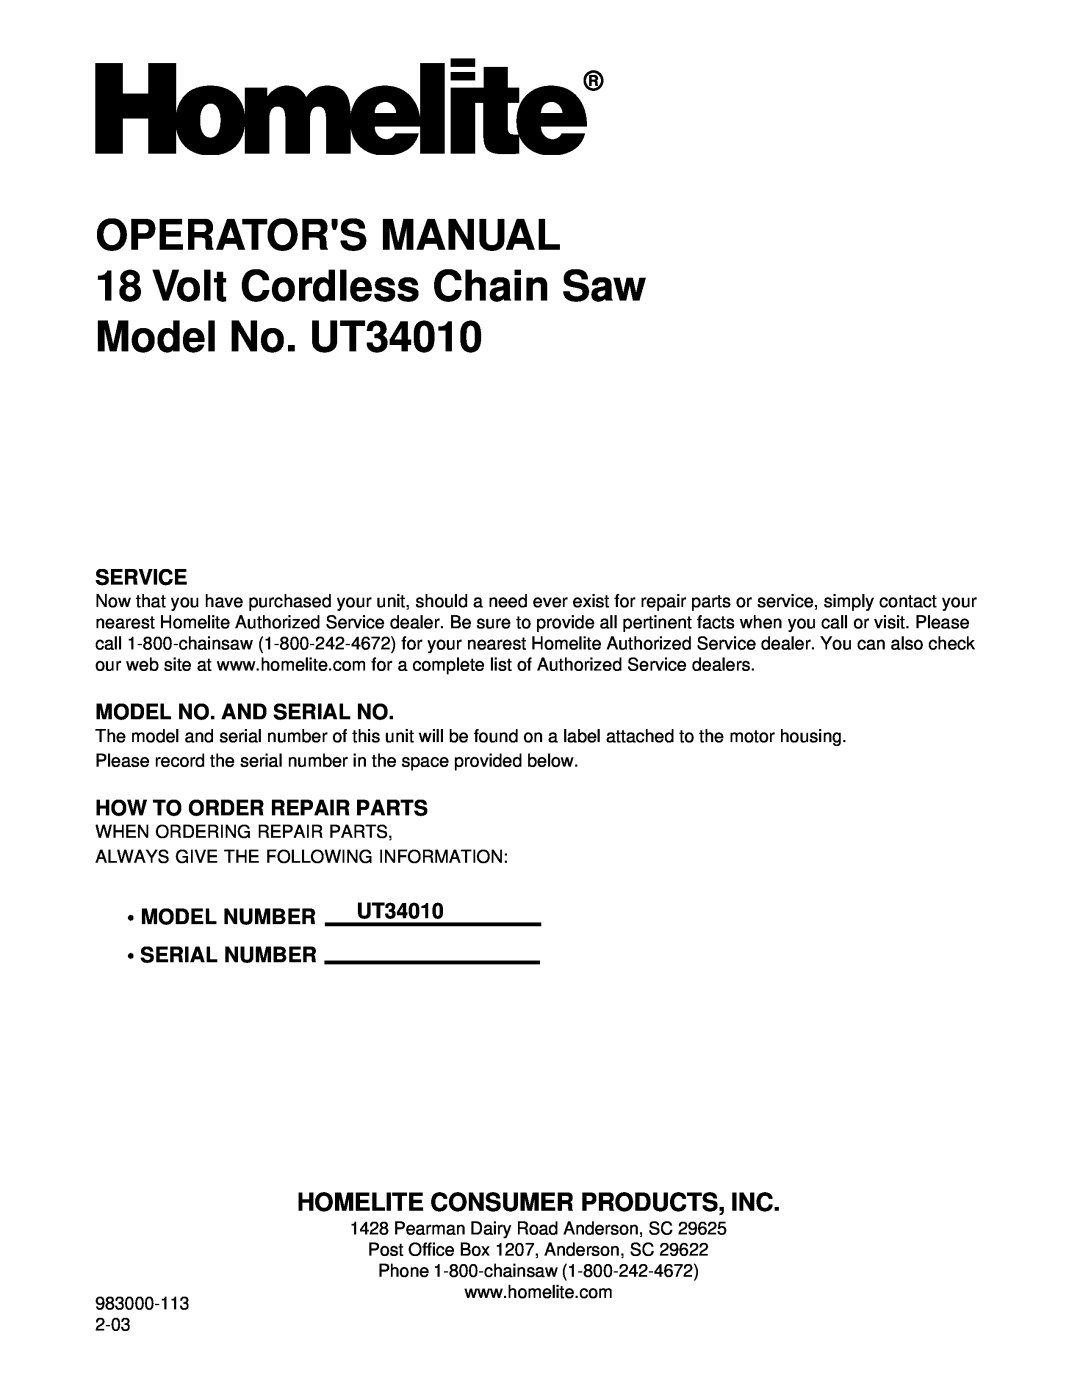 Homelite UT34010 manual Homelite Consumer Products, Inc, Service, Model No. And Serial No, How To Order Repair Parts 